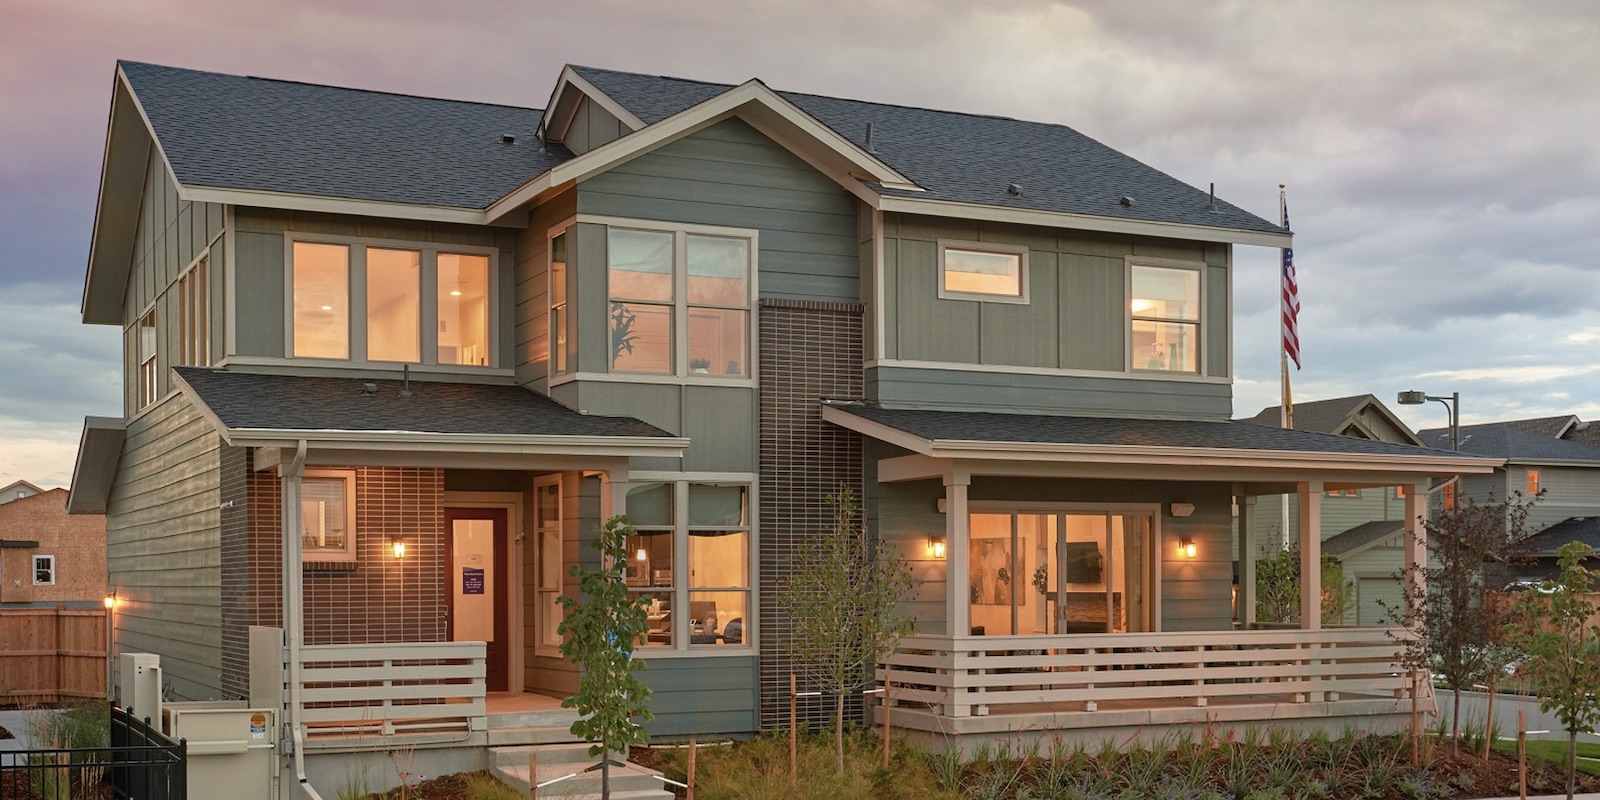 The Z.E.N. Home in Denver is a net zero energy home